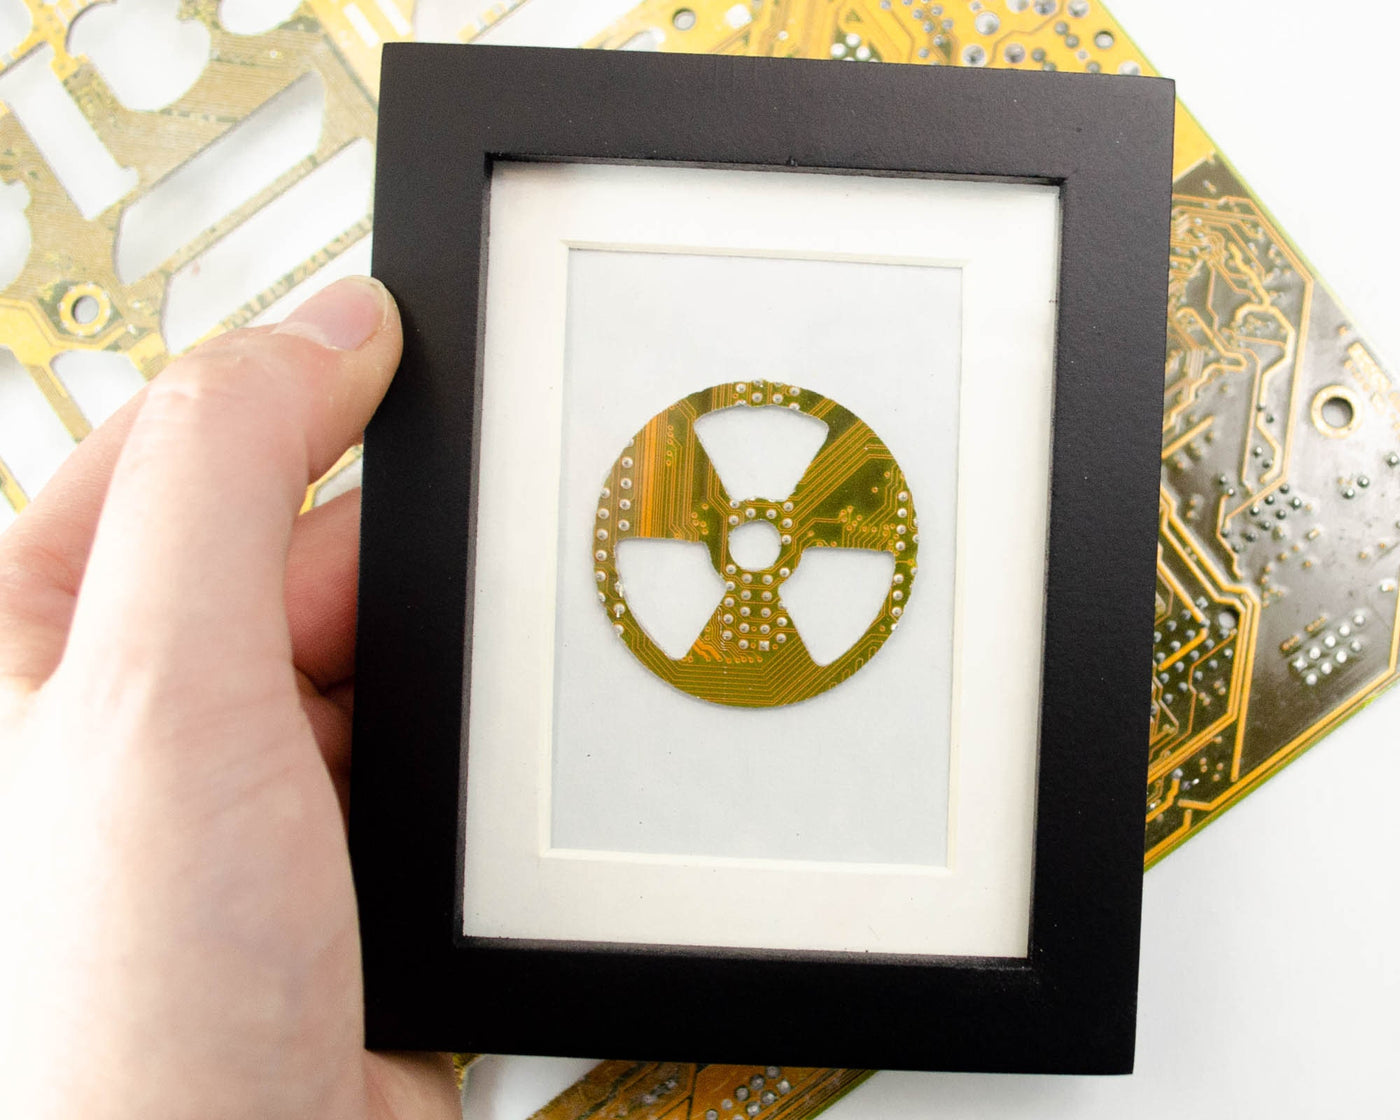 handmade recycled circuit board art shaped like radiation symbol and framed